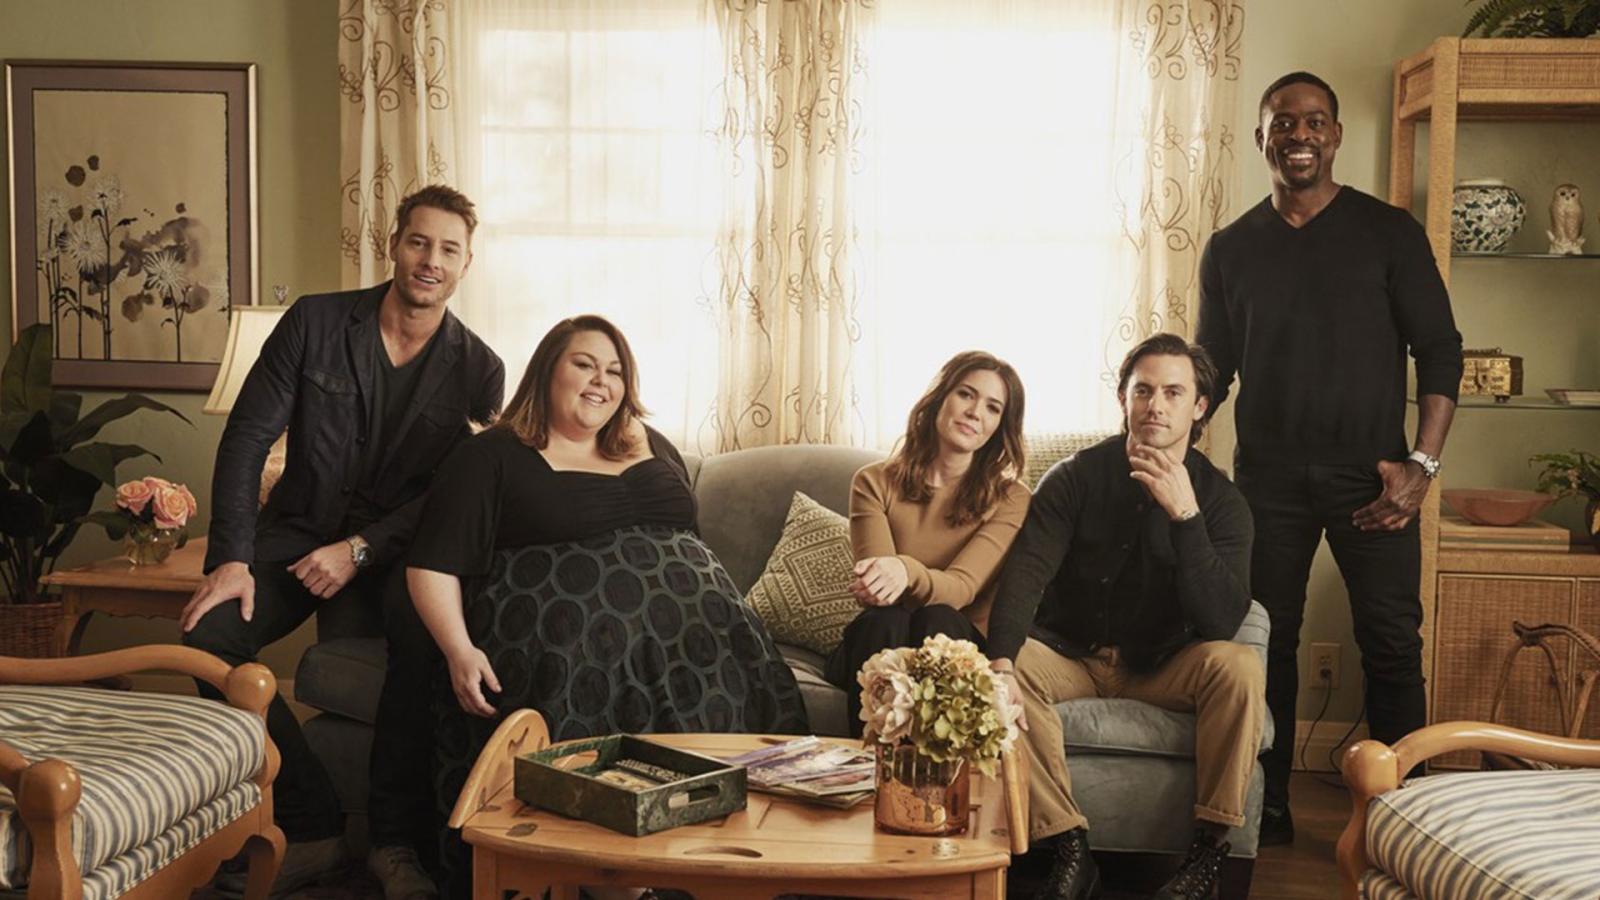 What Your Go-To Comfort TV Show Says About You - image 11